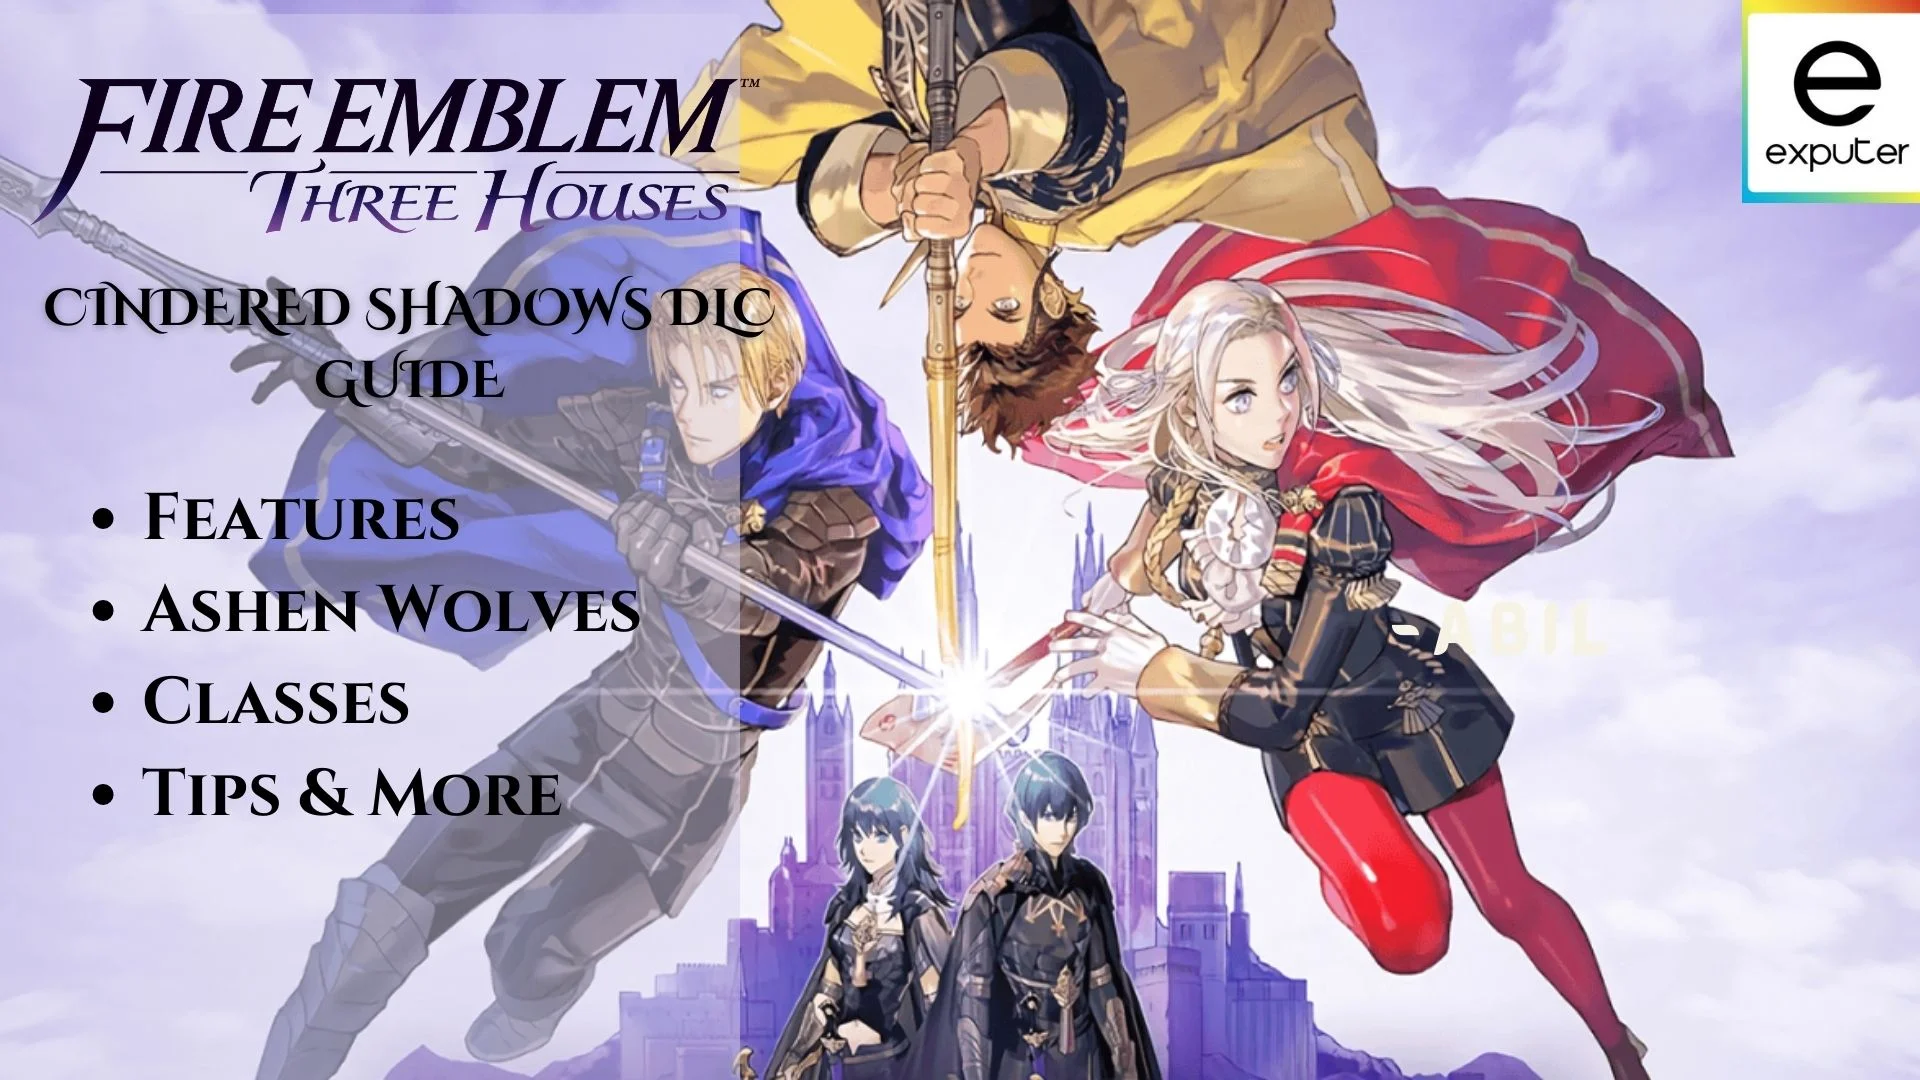 Fire Emblem: Three Houses - Cindered Shadows DLC launches next month,  trailer